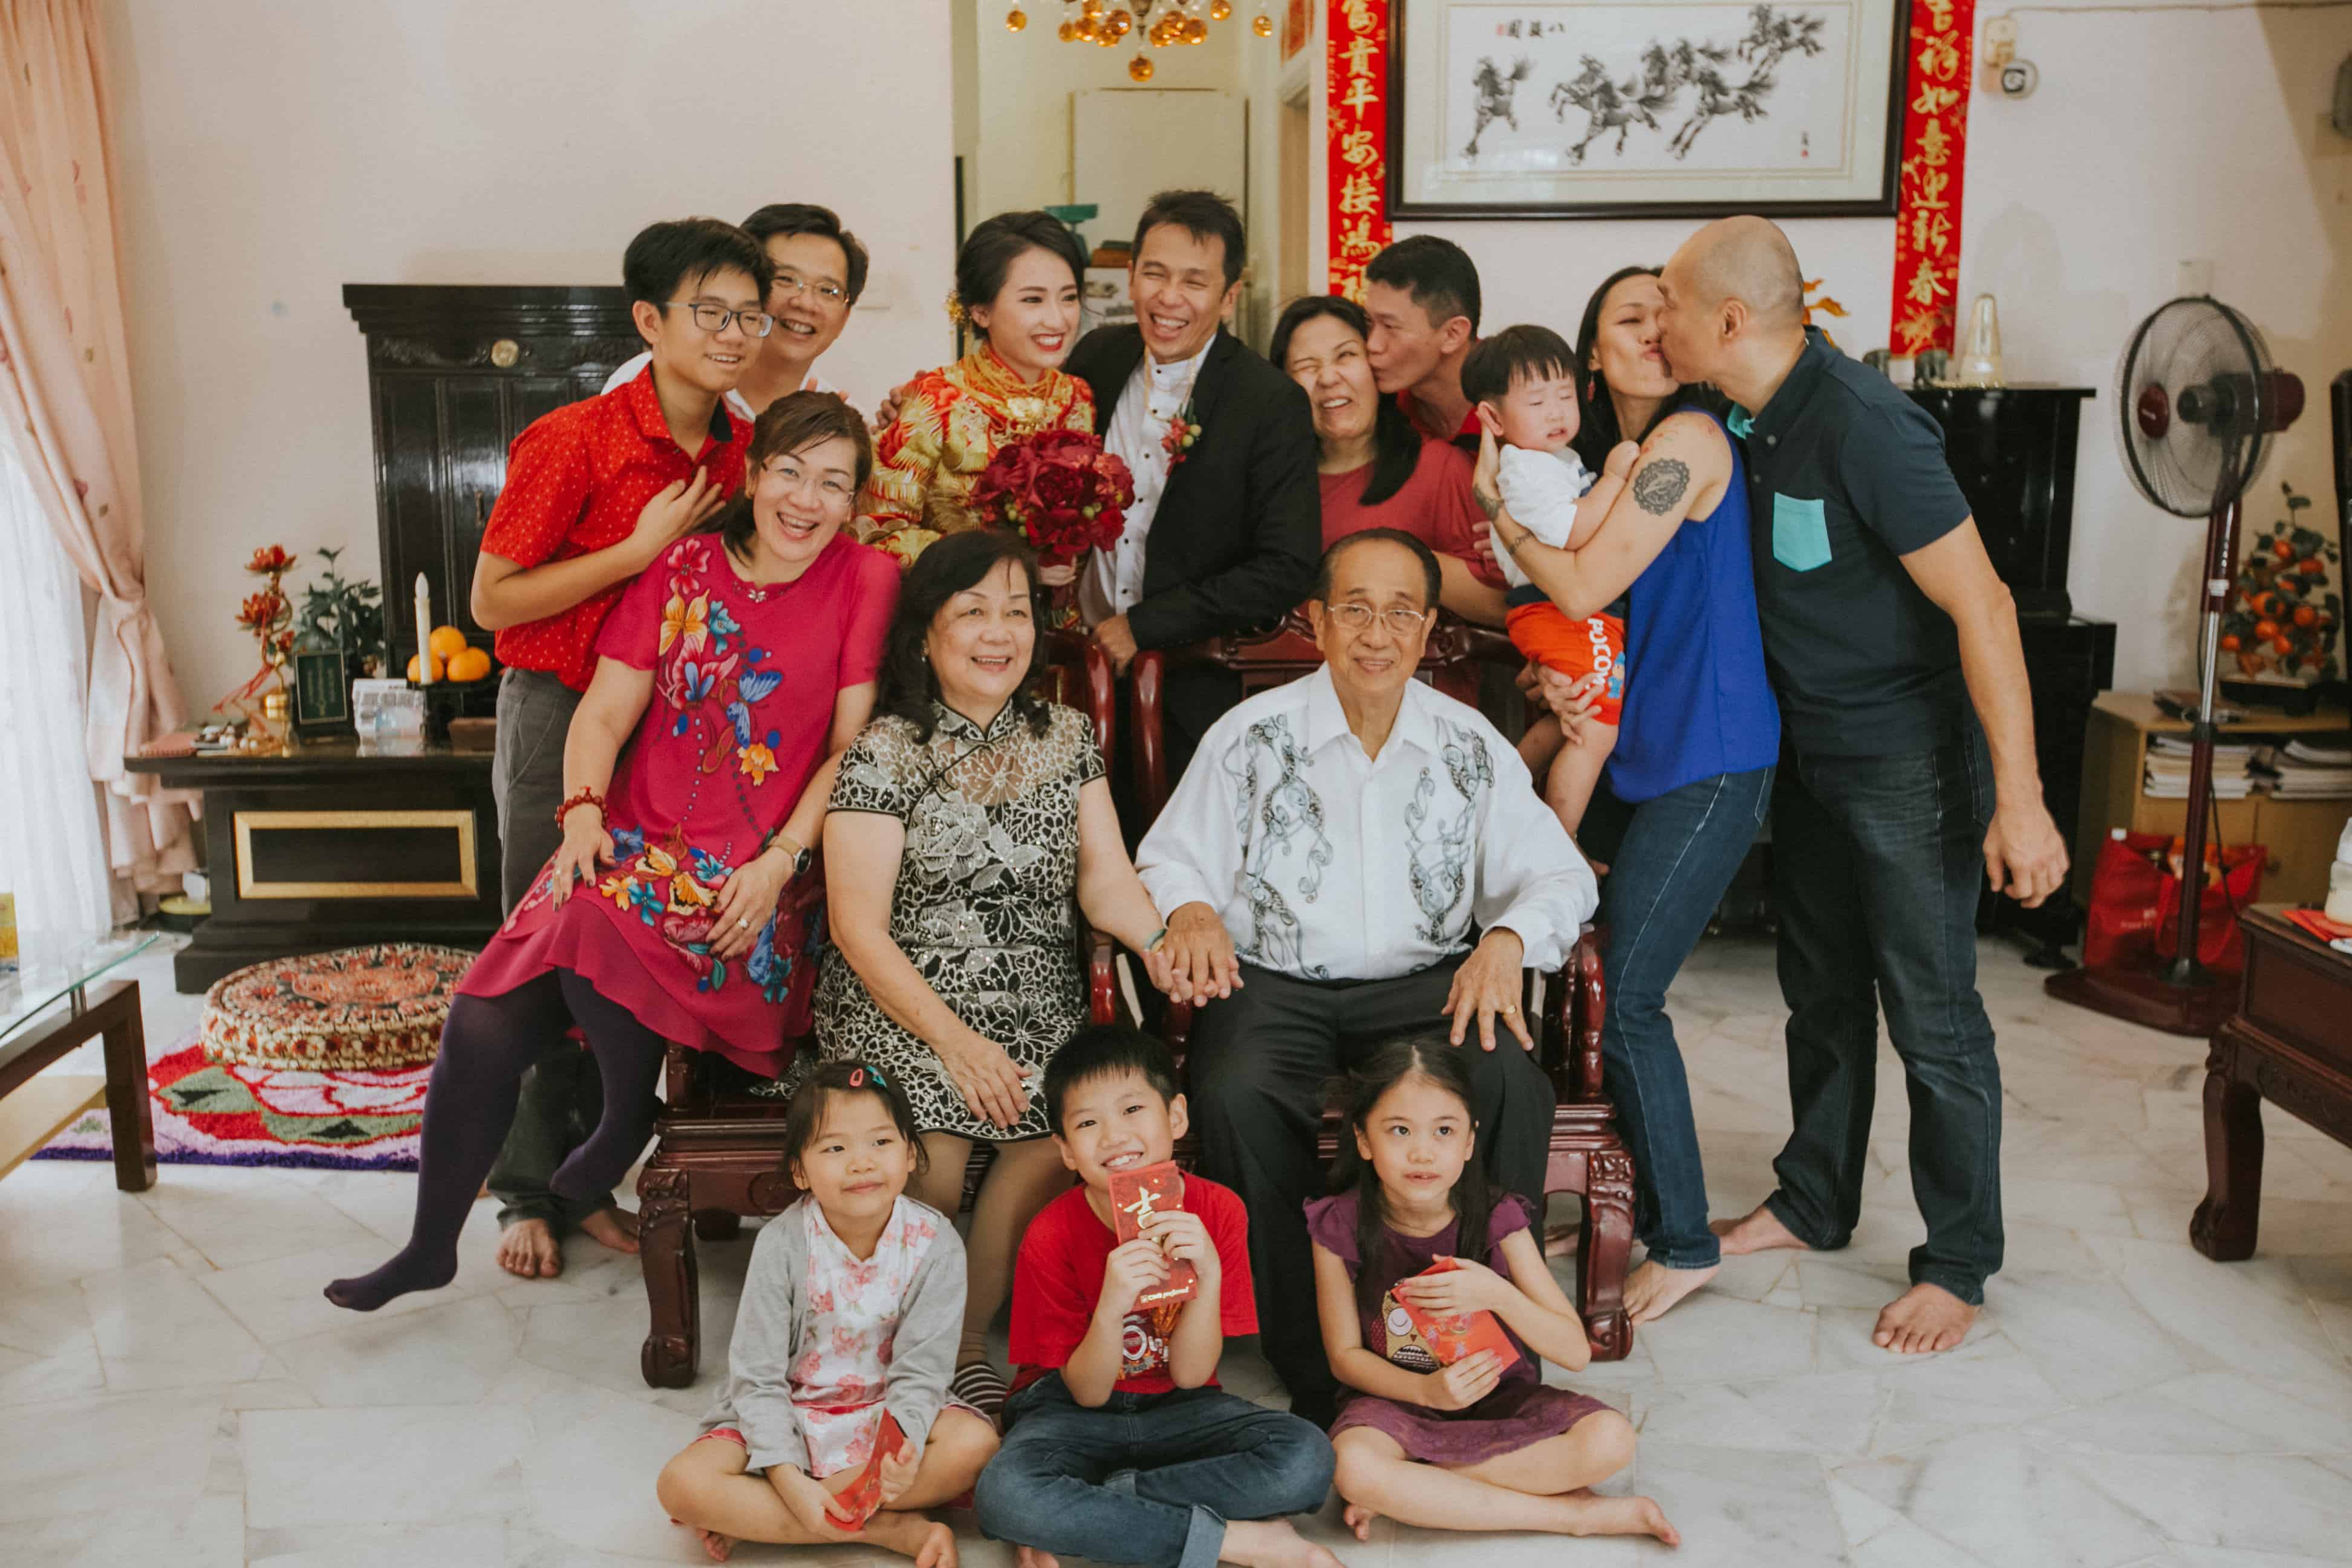 Kevin Tan Cliff Choong The Cross Effects Malaysia Destination Wedding Photographers Kuala Lumpur Actual Day in Petaling Jaya Photography Chinese Traditional Tea Ceremony Couple Portrait St. Regis Five Stars Hotel